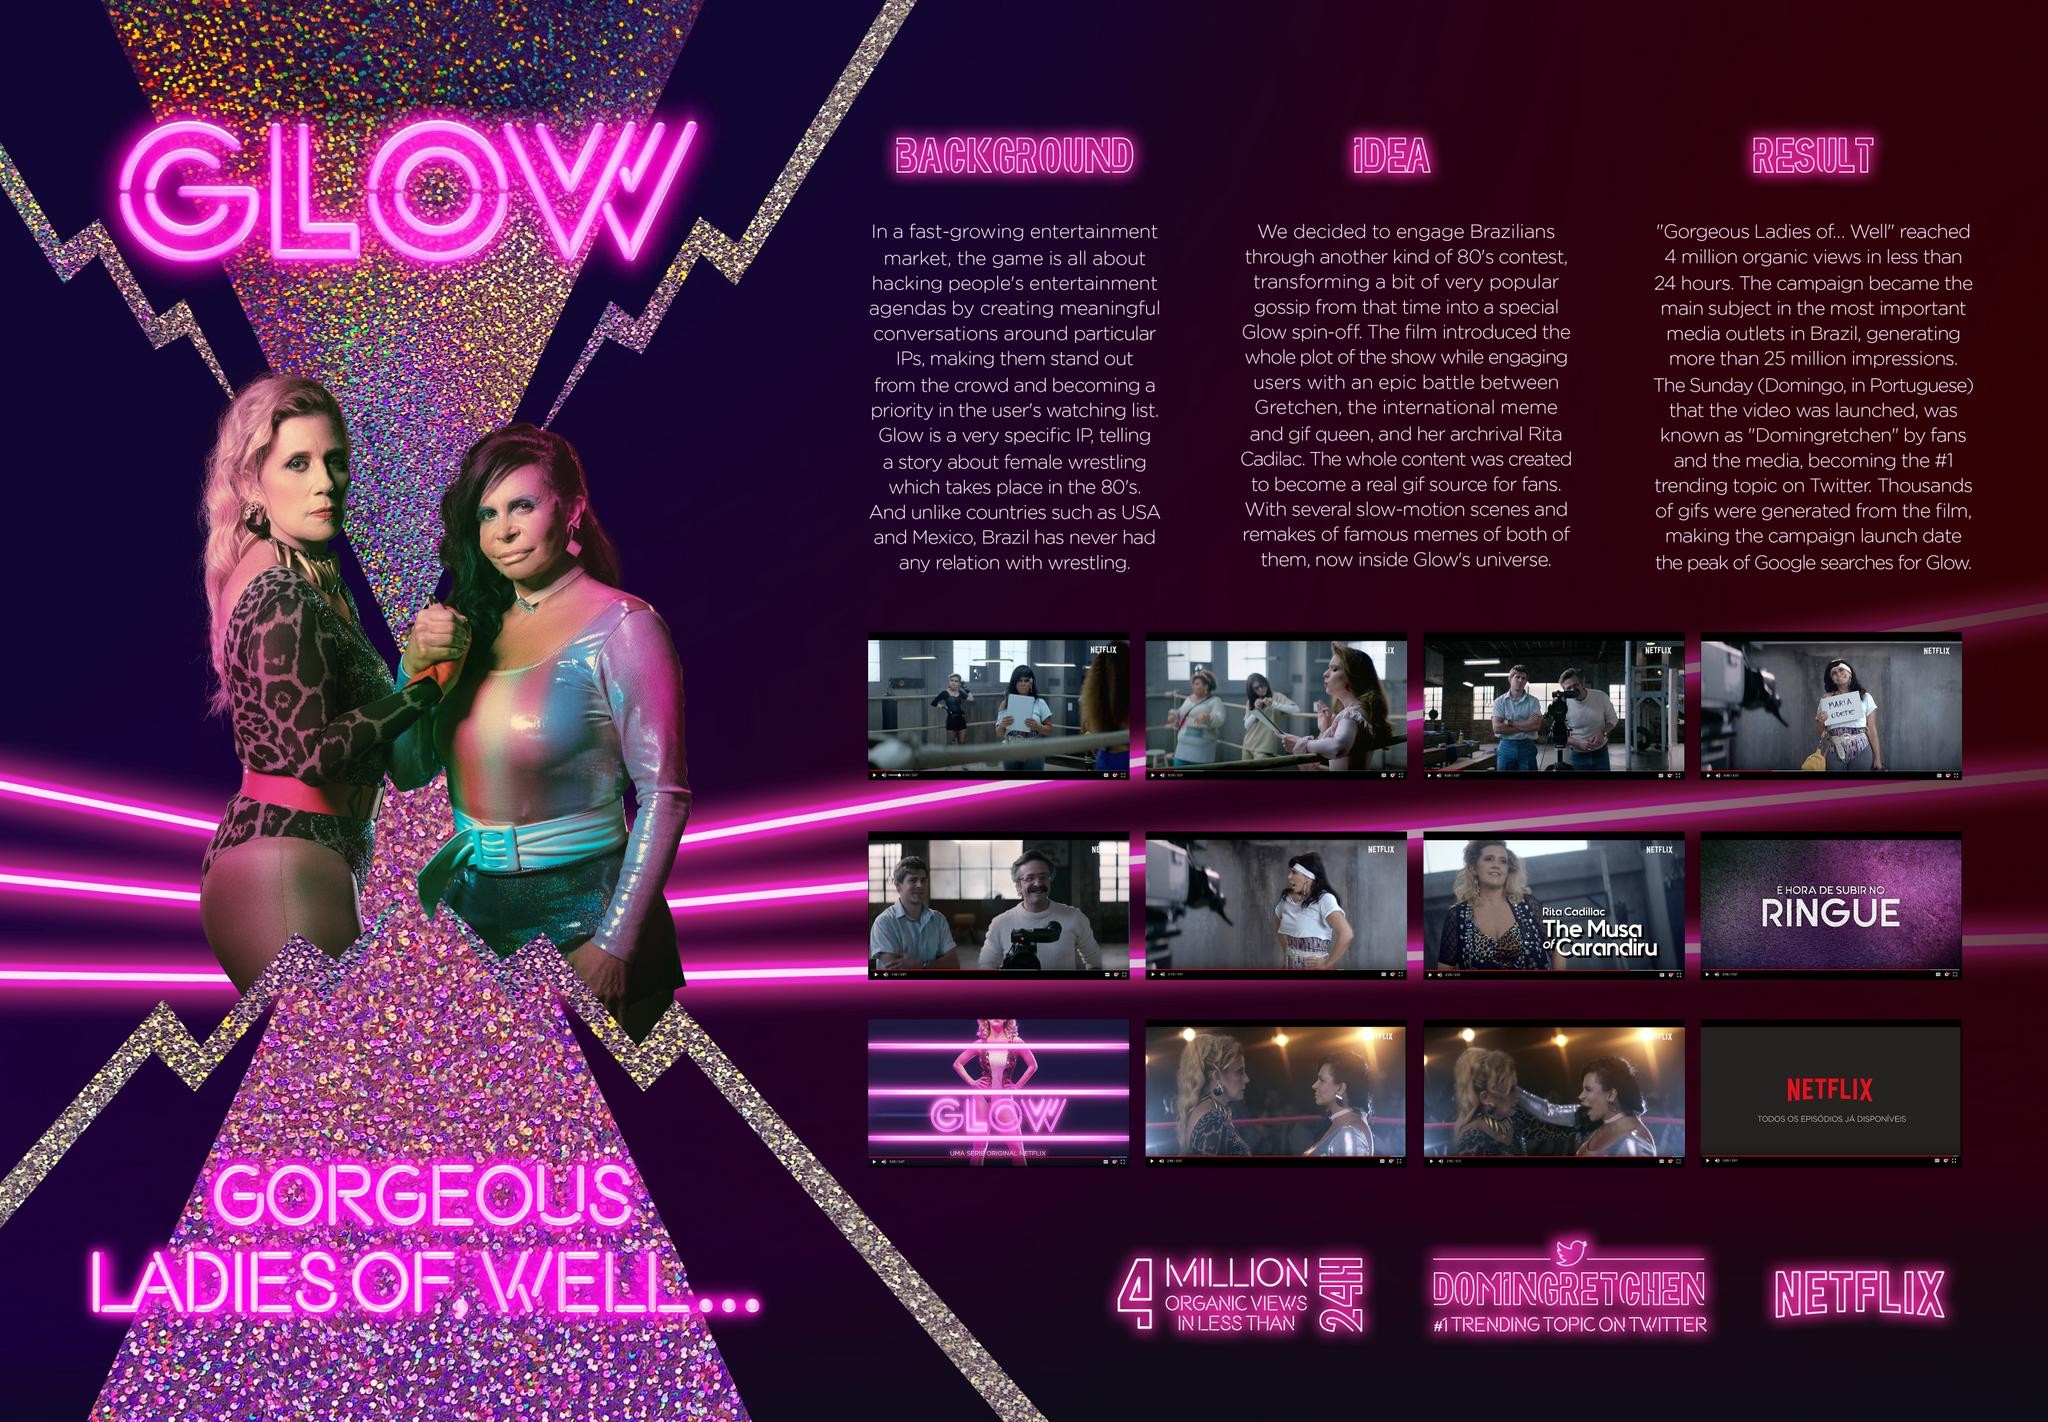 GLOW: Gorgeous Ladies of, Well...